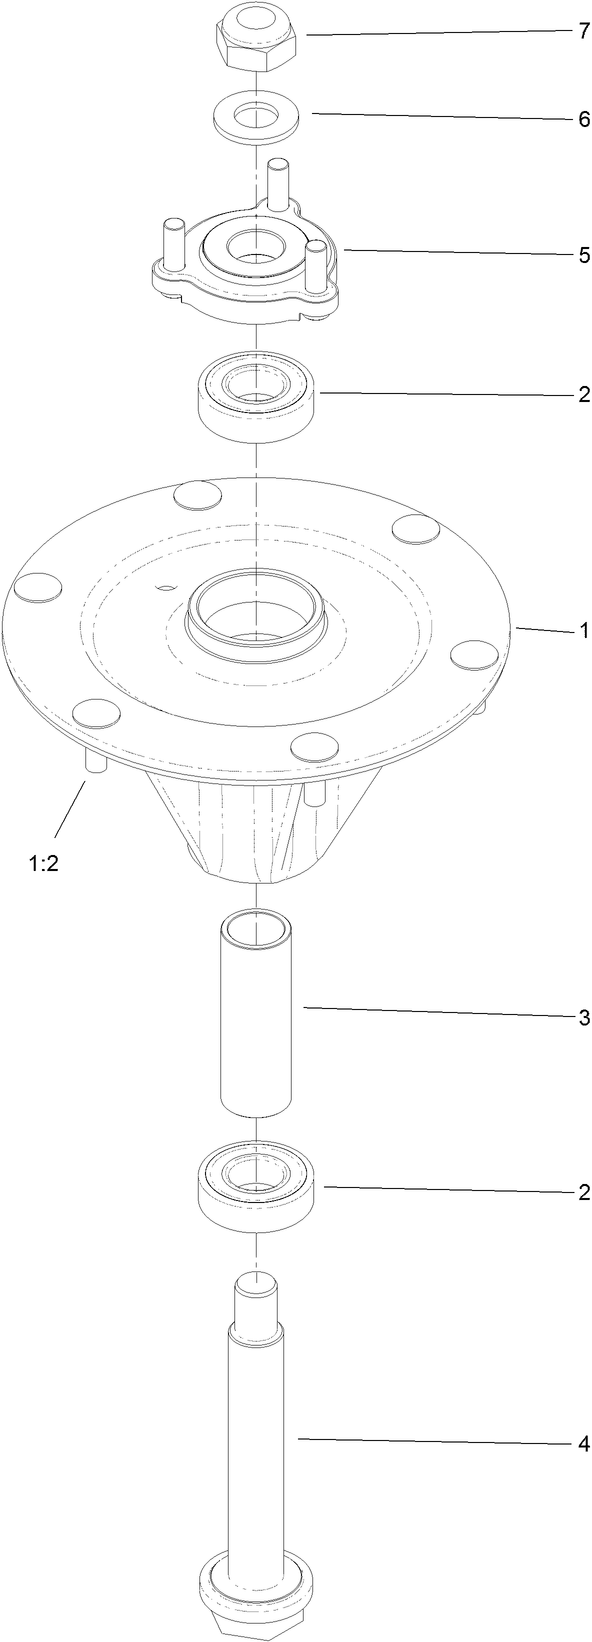 Spindle Assembly No. 127-0560